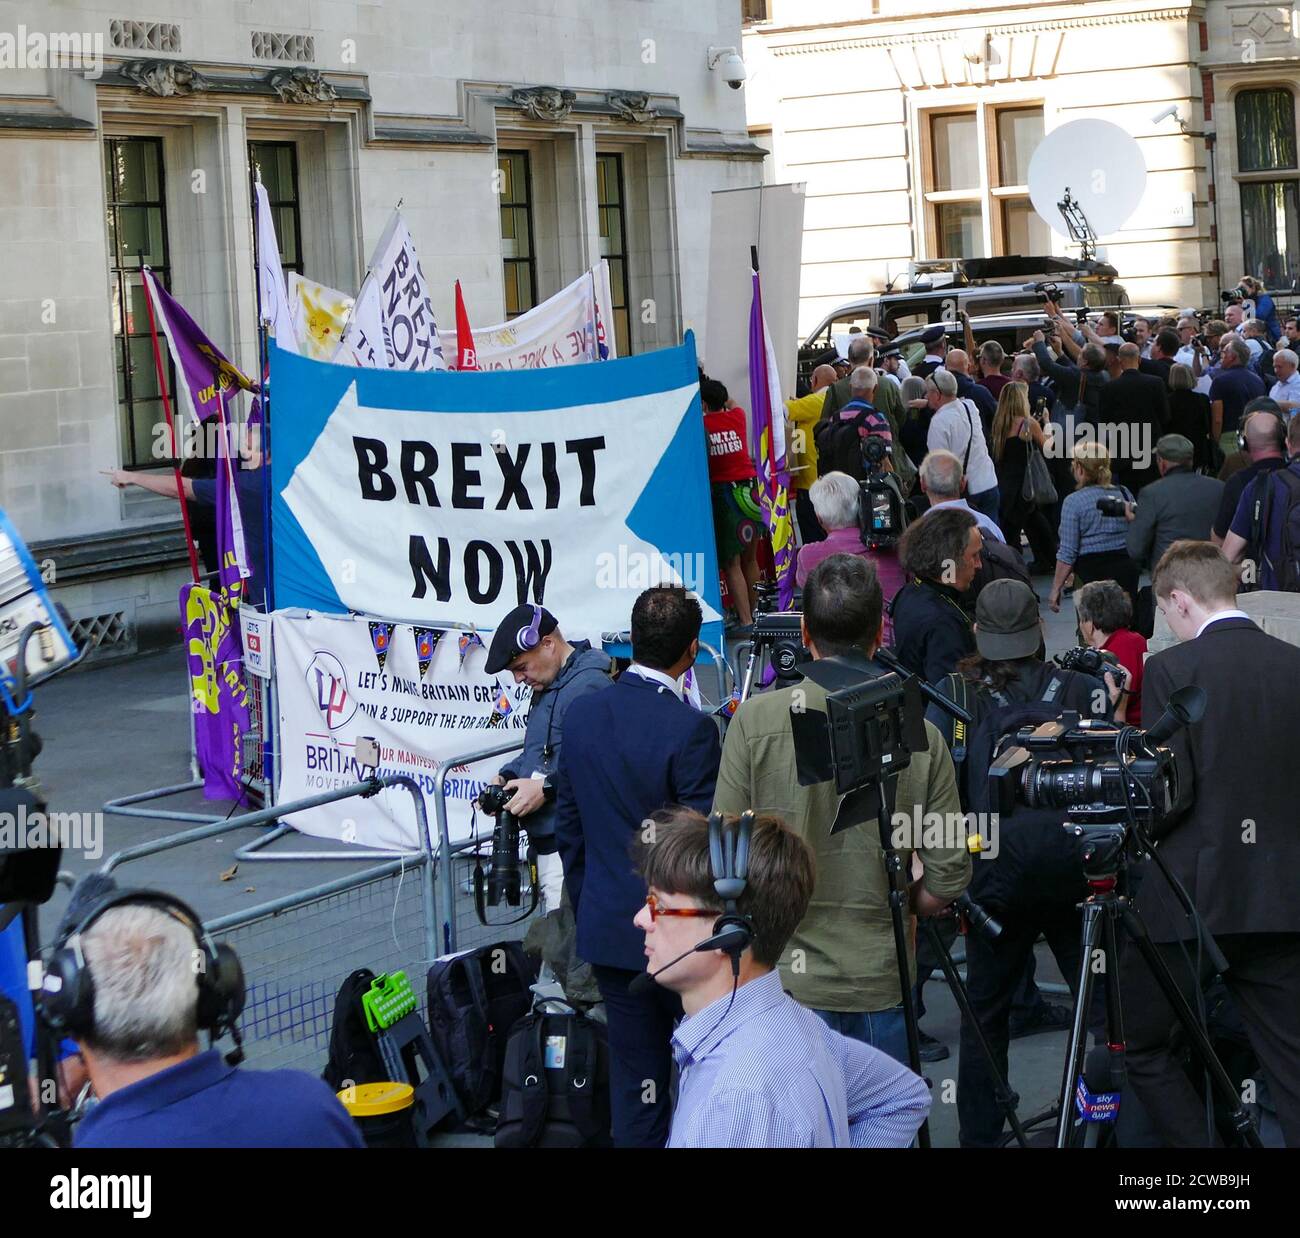 Gina Miller, and her lawyers jeered by Brexit supporters, as they leave the Supreme Court in London after day three of her challenge to the Prorogation of Parliament. 19th Sept 2019.the prorogation of the Parliament, was ordered by Queen Elizabeth II upon the advice of the Conservative Prime Minister, Boris Johnson, on 28 August 2019. opposition politicians saw this as an unconstitutional attempt to reduce parliamentary scrutiny of the Government's Brexit plan. Gina Nadira Miller is a Guyanese-British business owner and activist who initiated the 2016 R v Secretary of State for Exiting the Eur Stock Photo